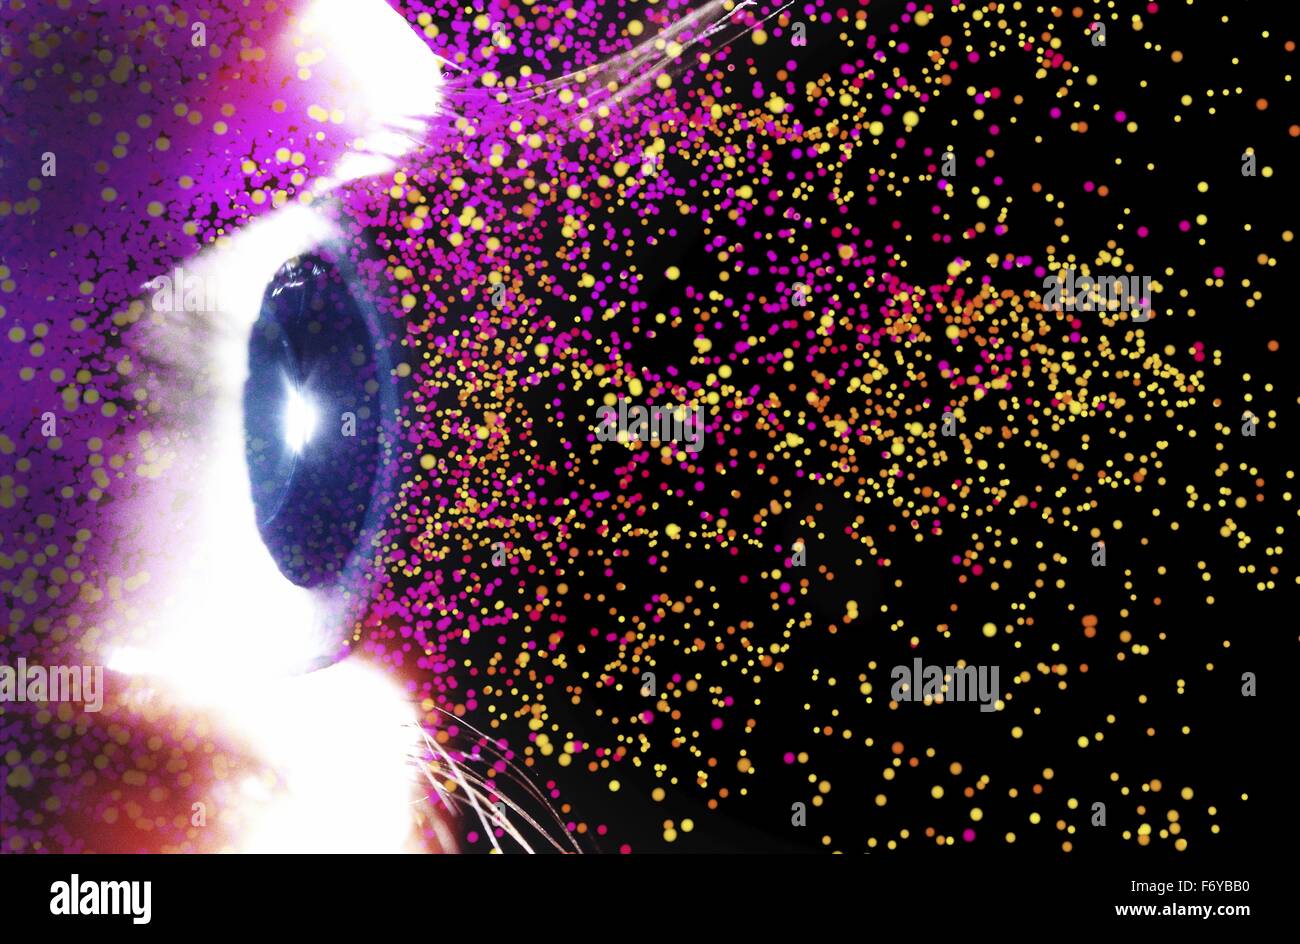 Photograph of a human eye overlaid computer artwork of colourful particles, depicting fantasy, imagination, dreaming, physics, light or stars. Stock Photo